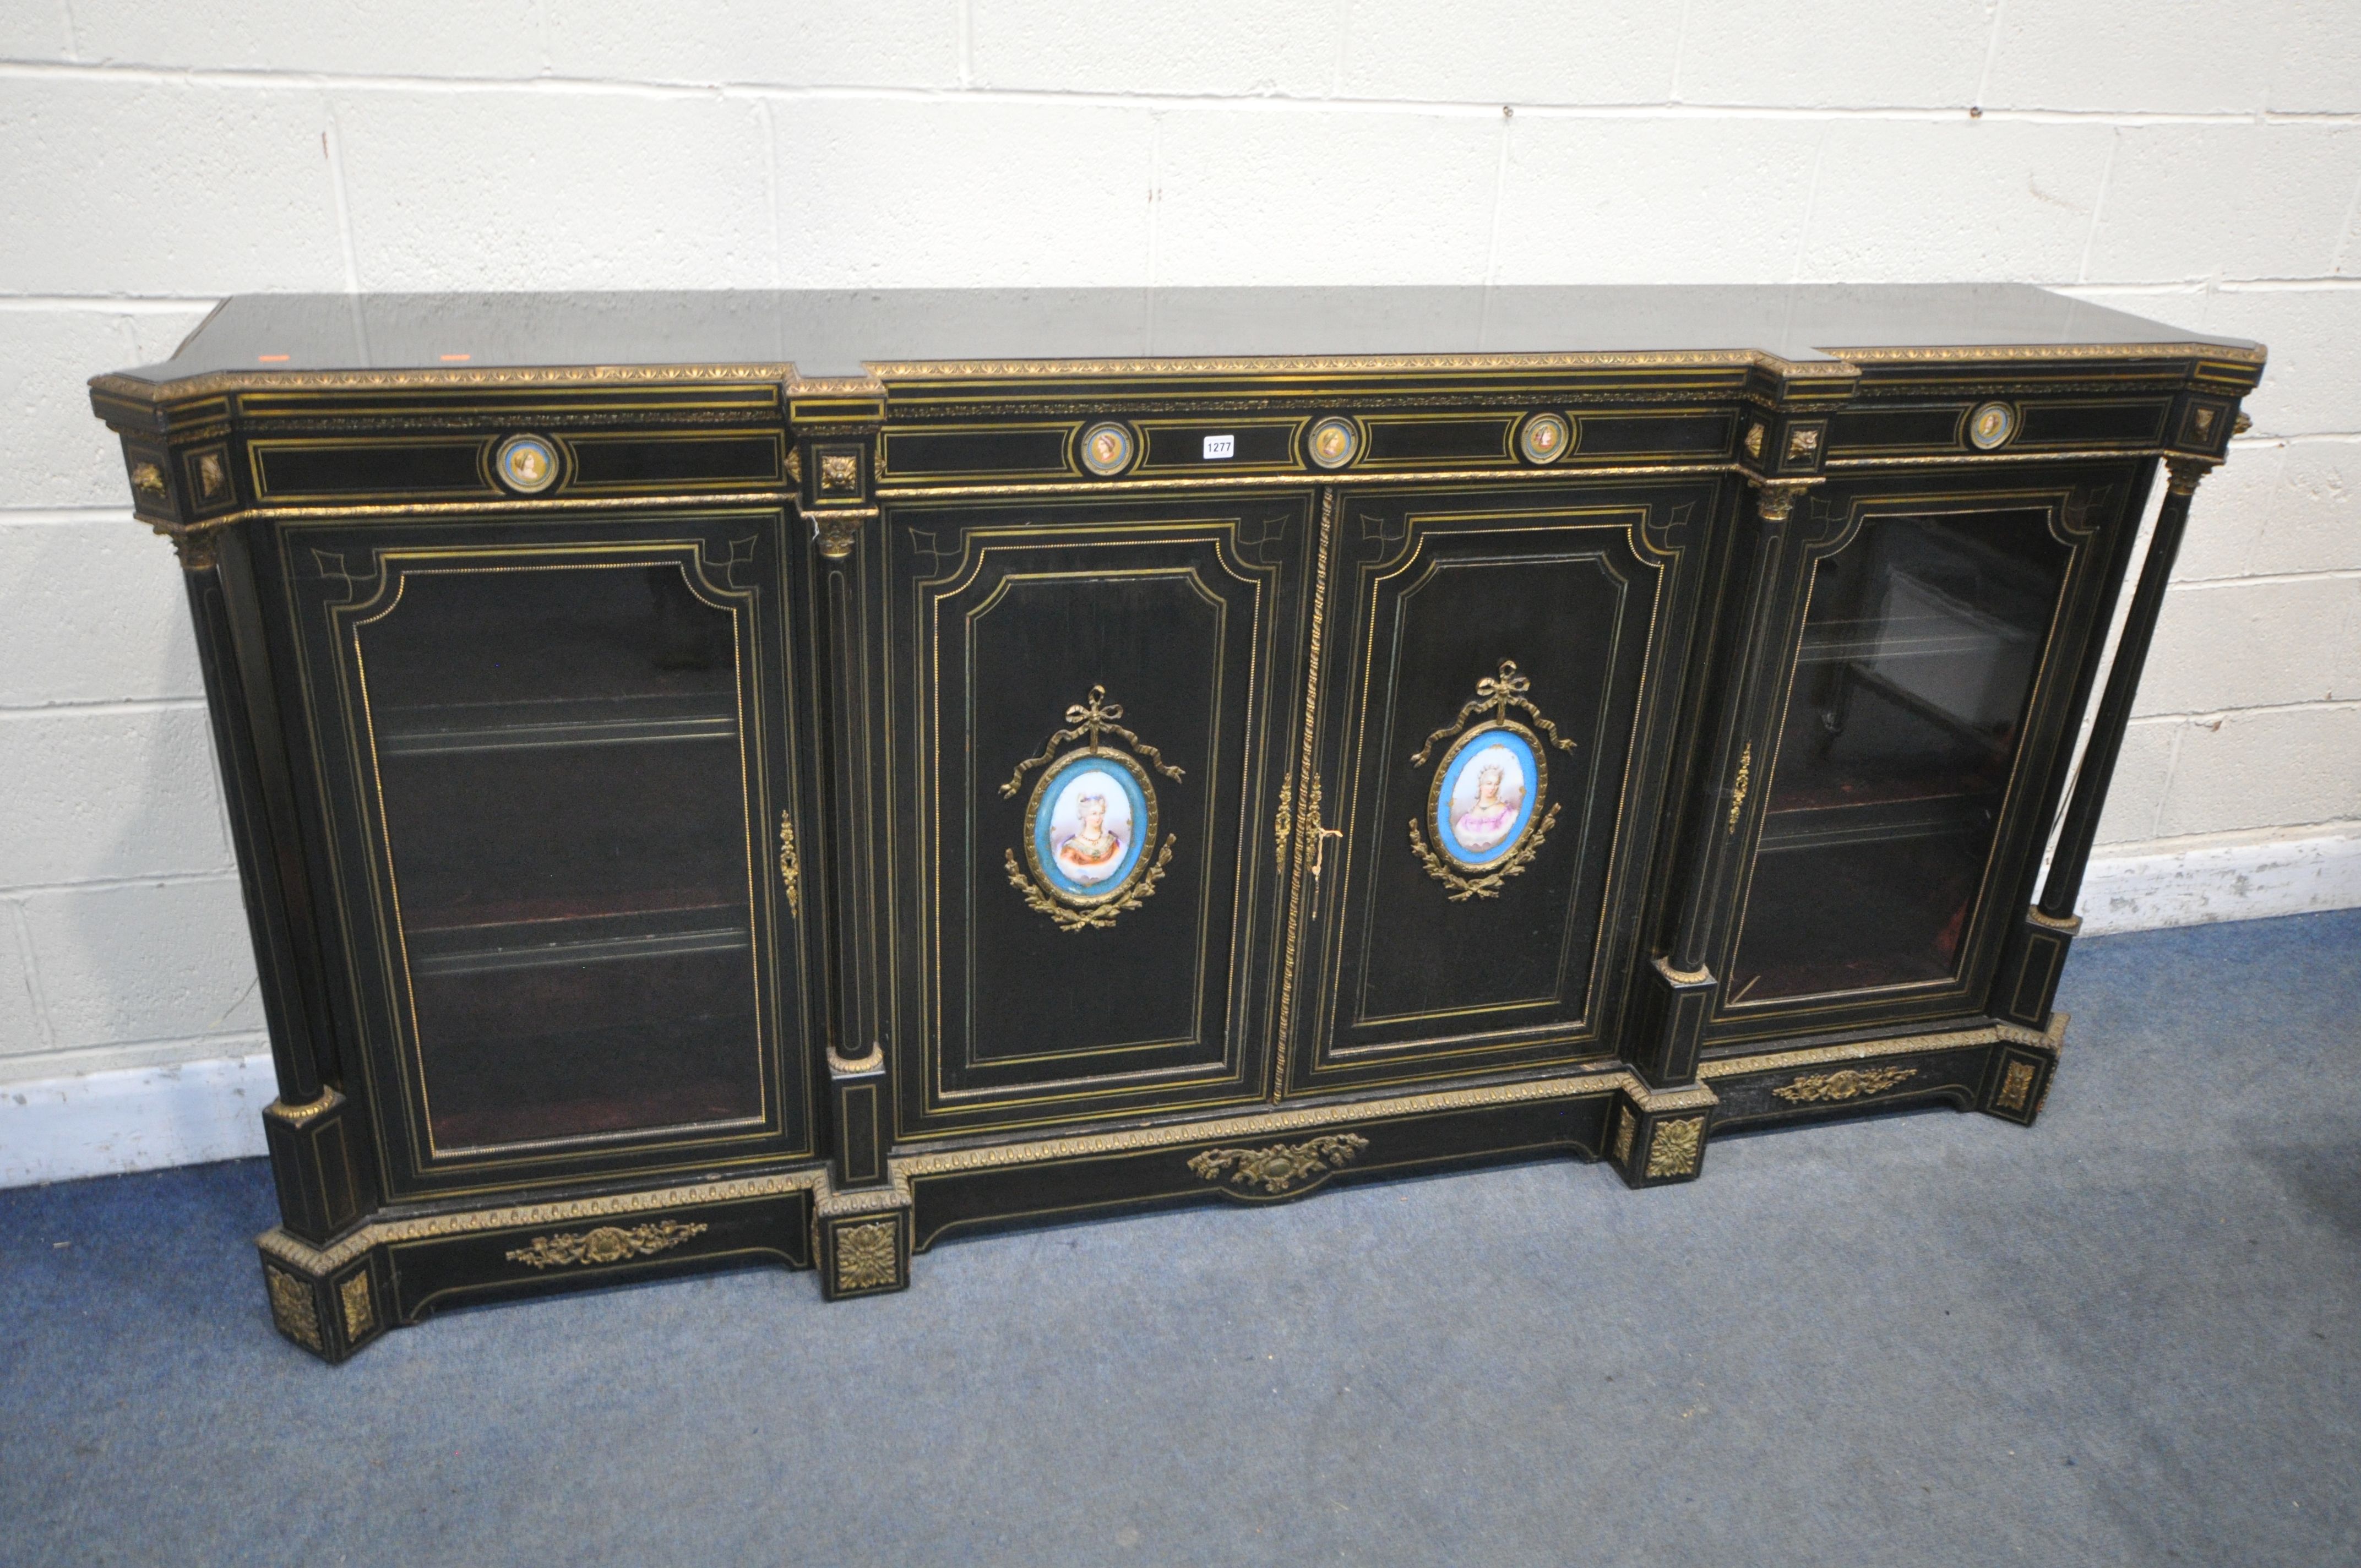 A 19TH CENTURY EBONISED AND GILT BRASS CREDENZA, with four moulded tops supporting Corinthian